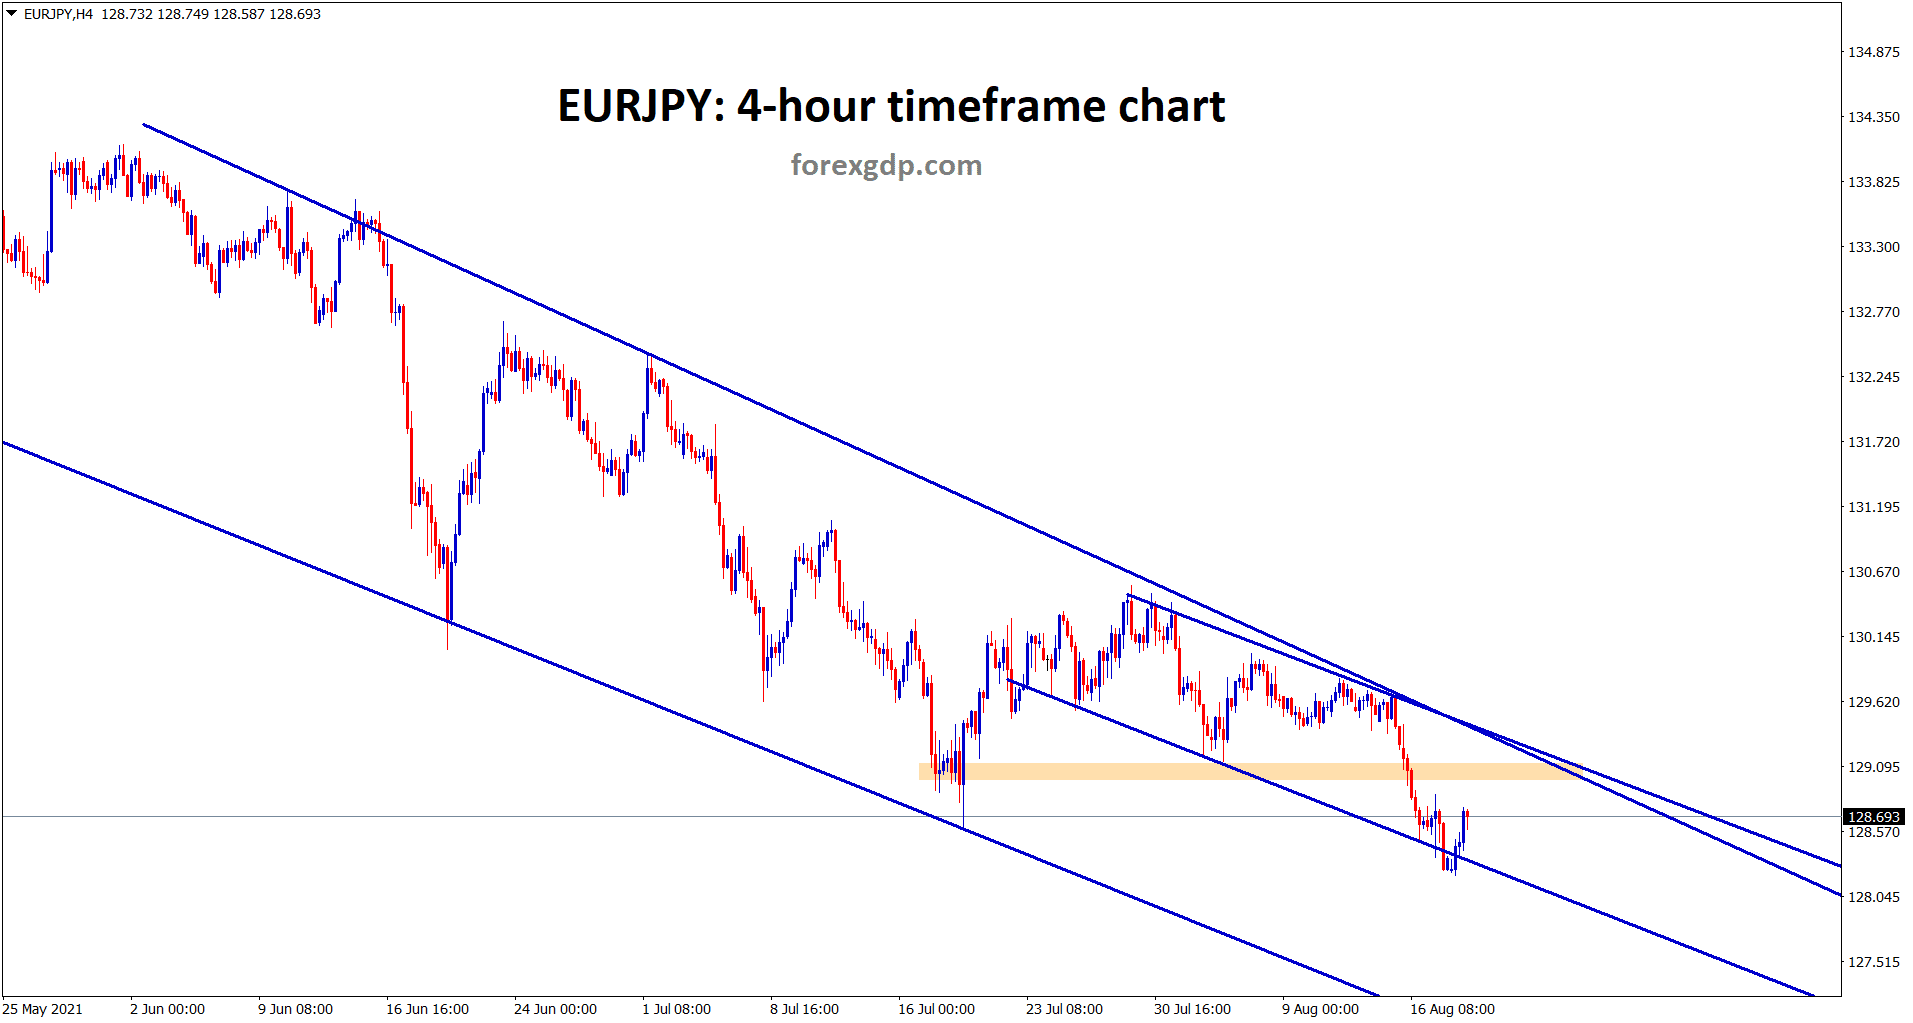 EURJPY bounces back from the minor descending channel however it has broken the recent lows.